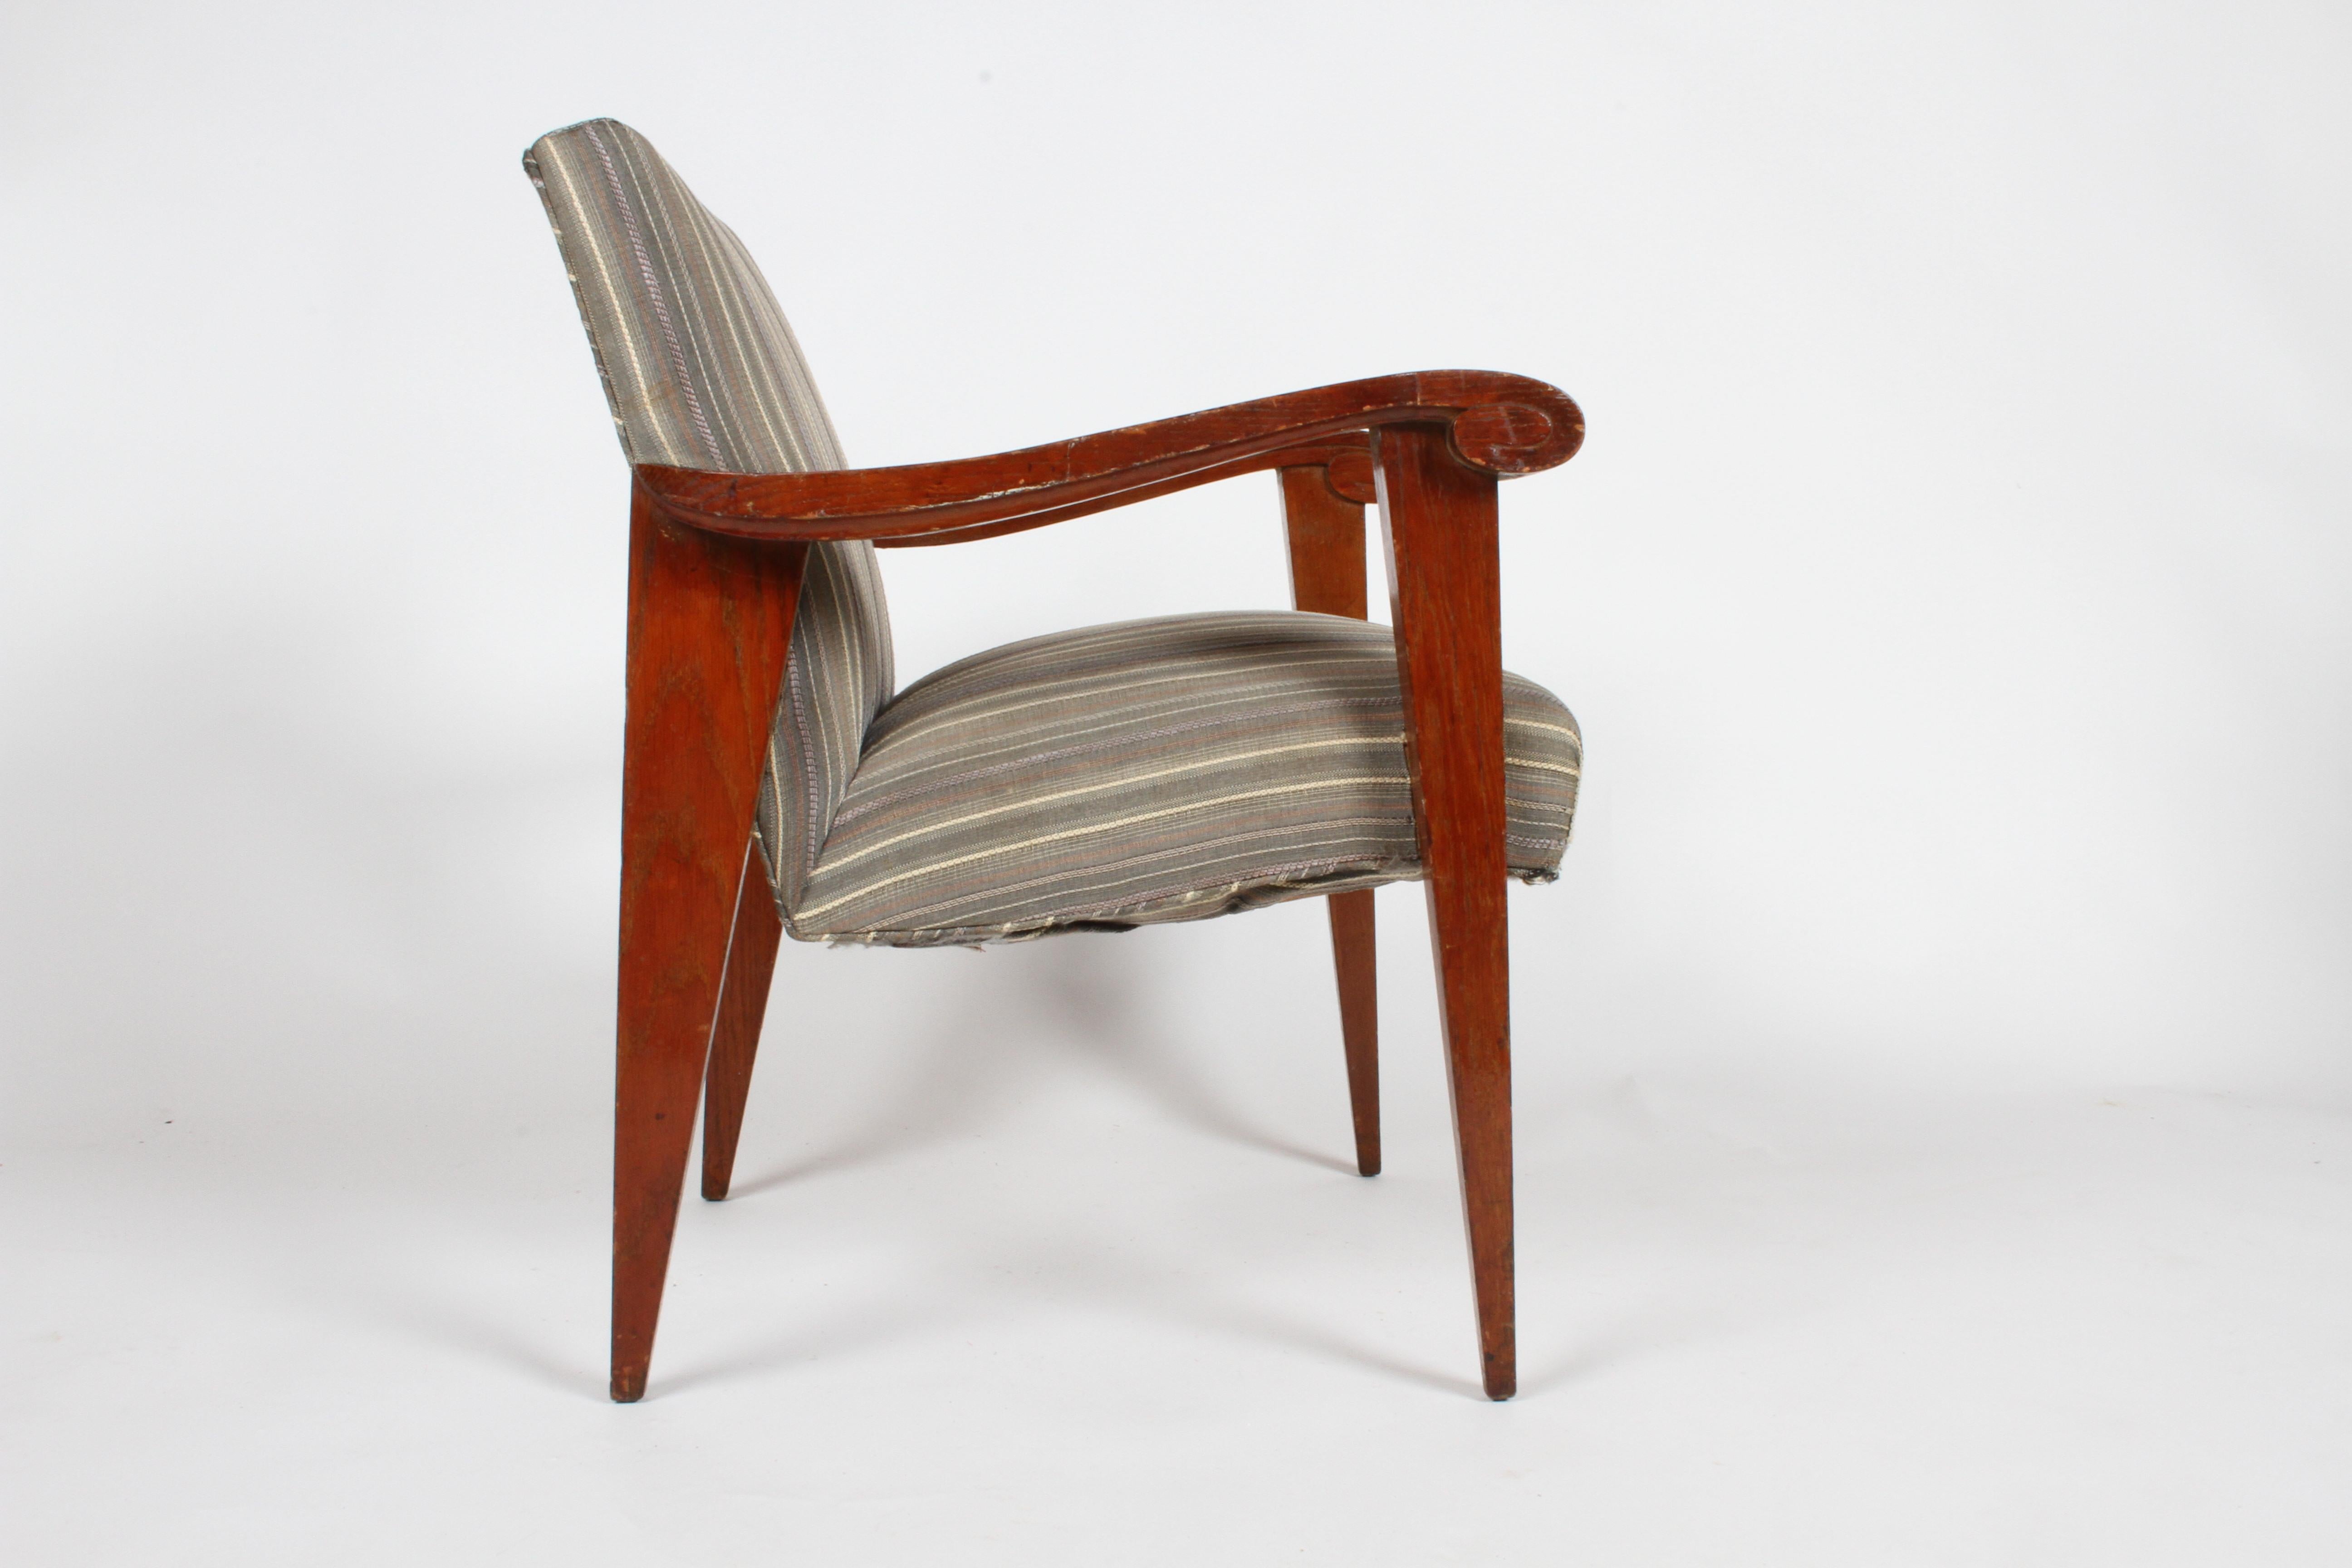 French deco, French Moderne or midcentury single armchair, circa 1940s with sculptural scroll arm and dramatic triangle form legs. Older upholstery should be updated, would look great with California sheep skin. Oak frame has wear, loss, will be